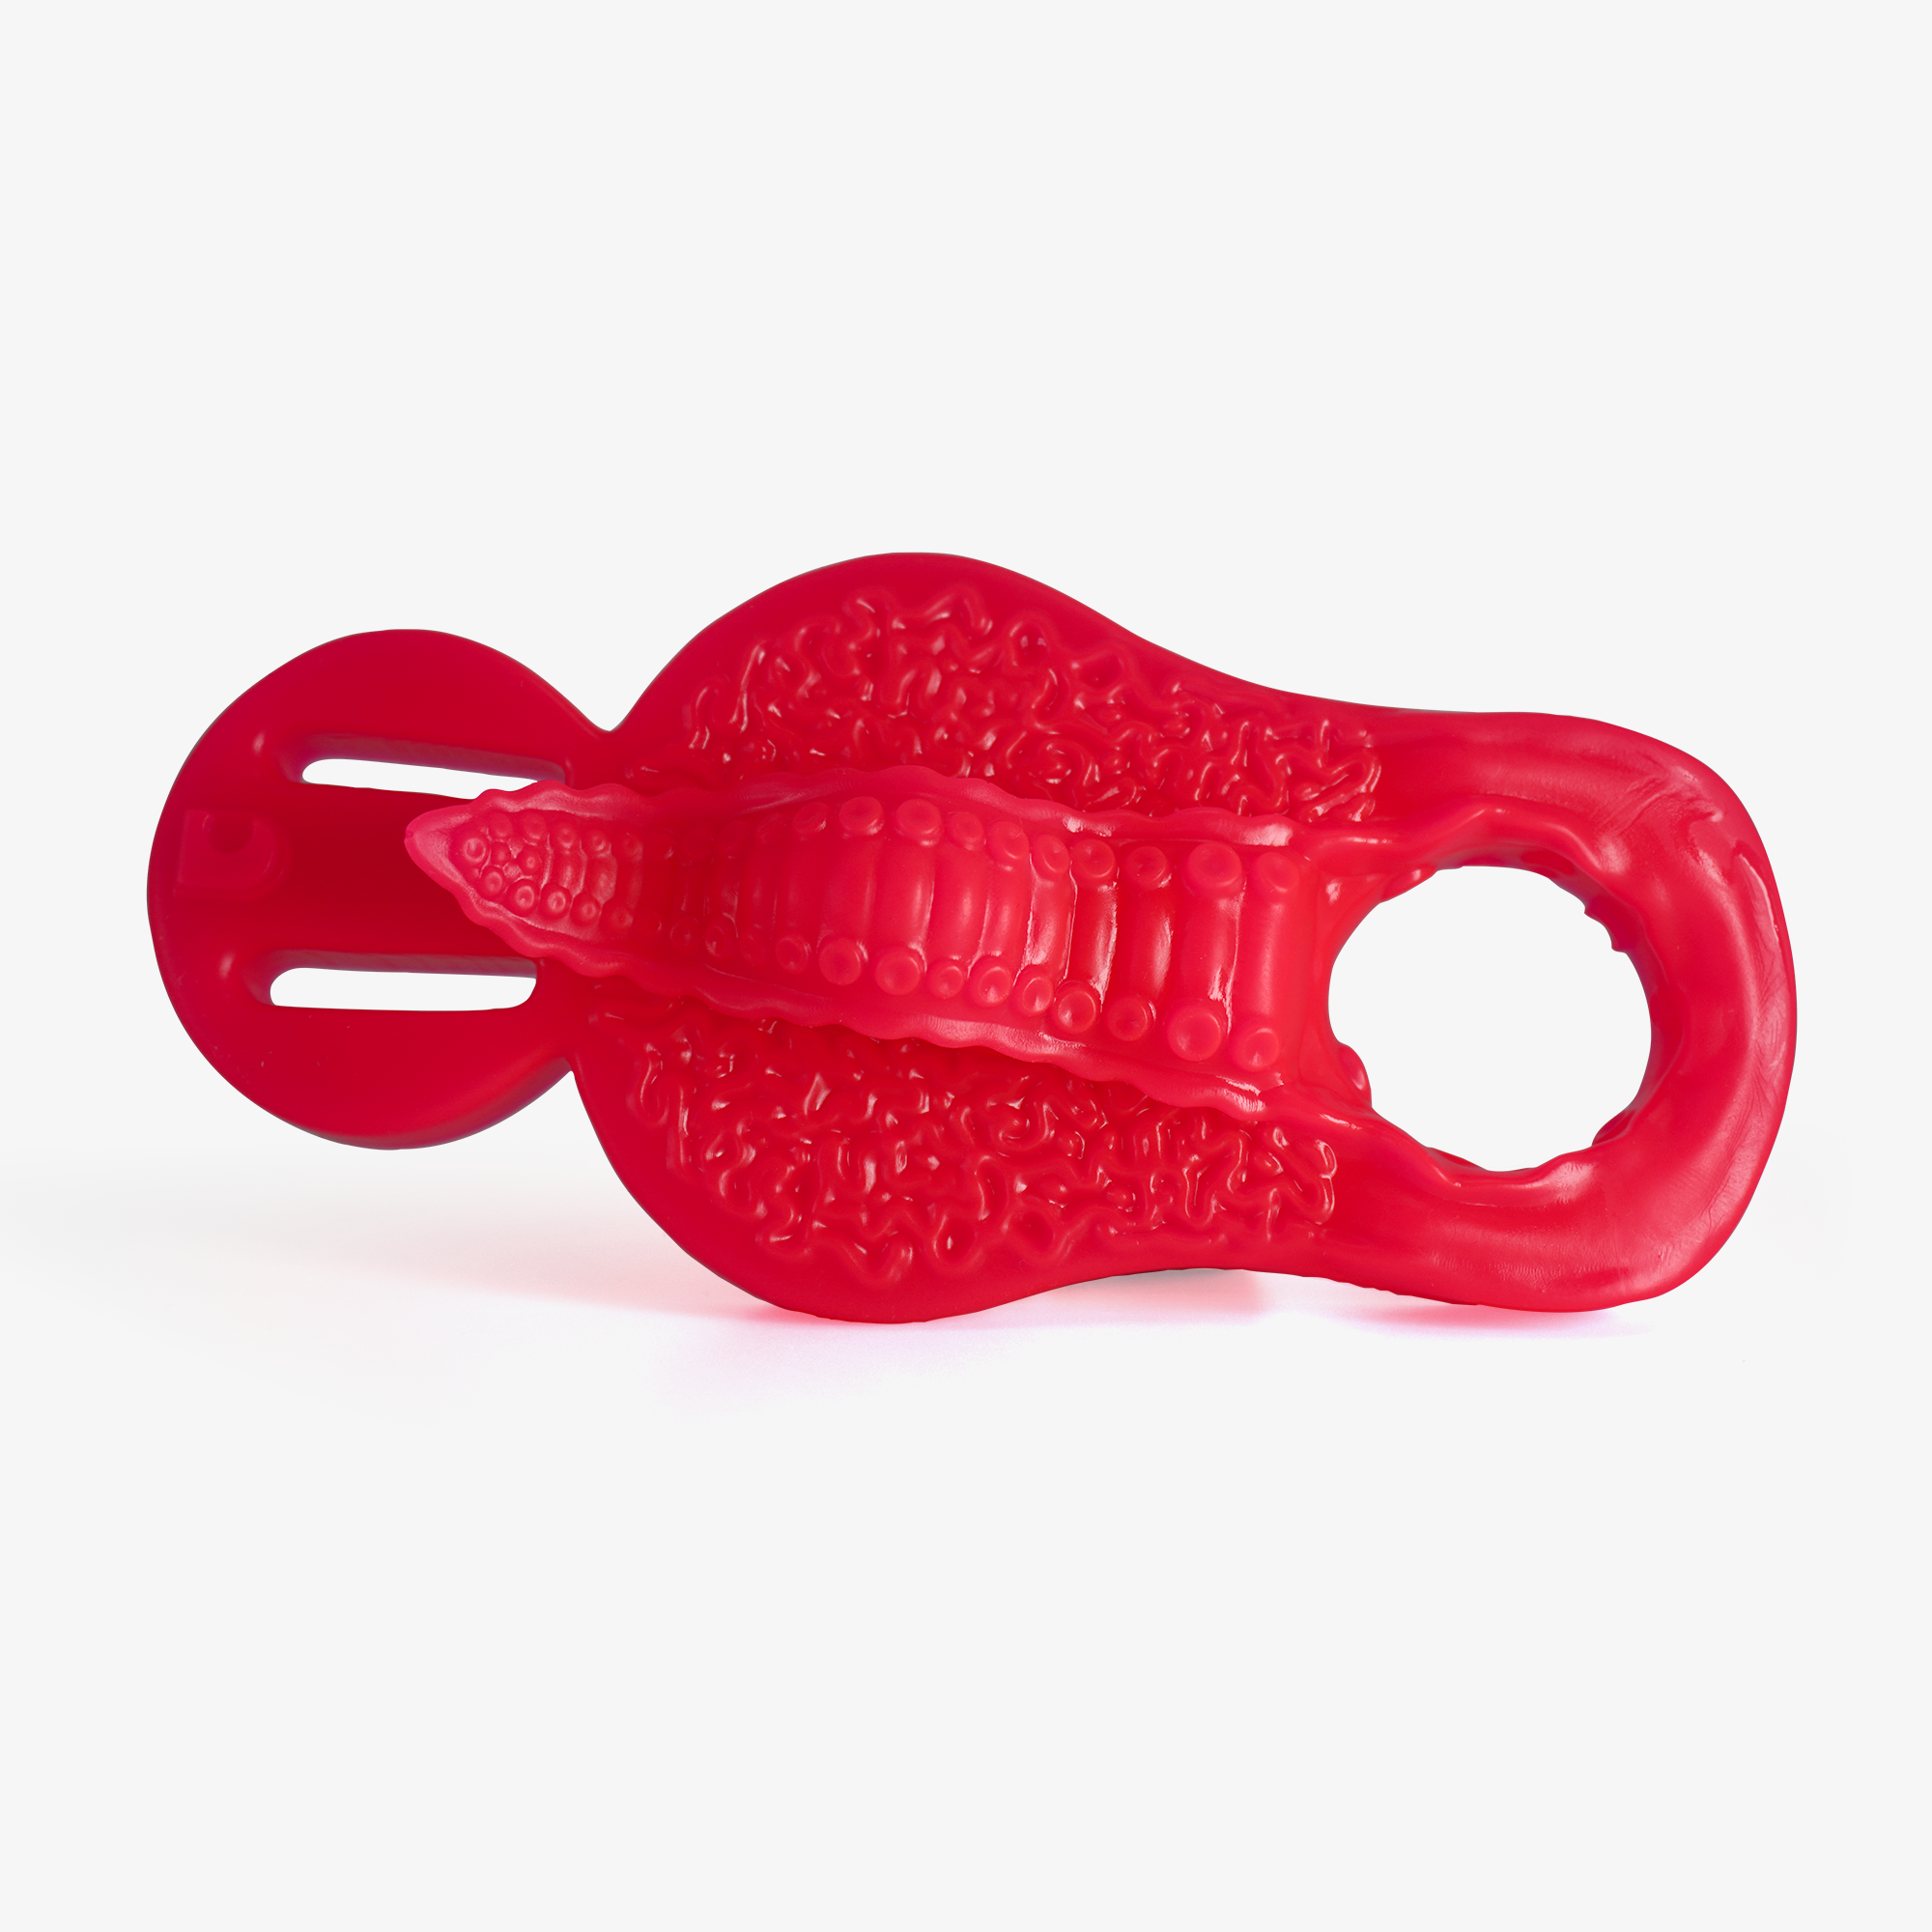 The Tentacle Grinder Cock Ring